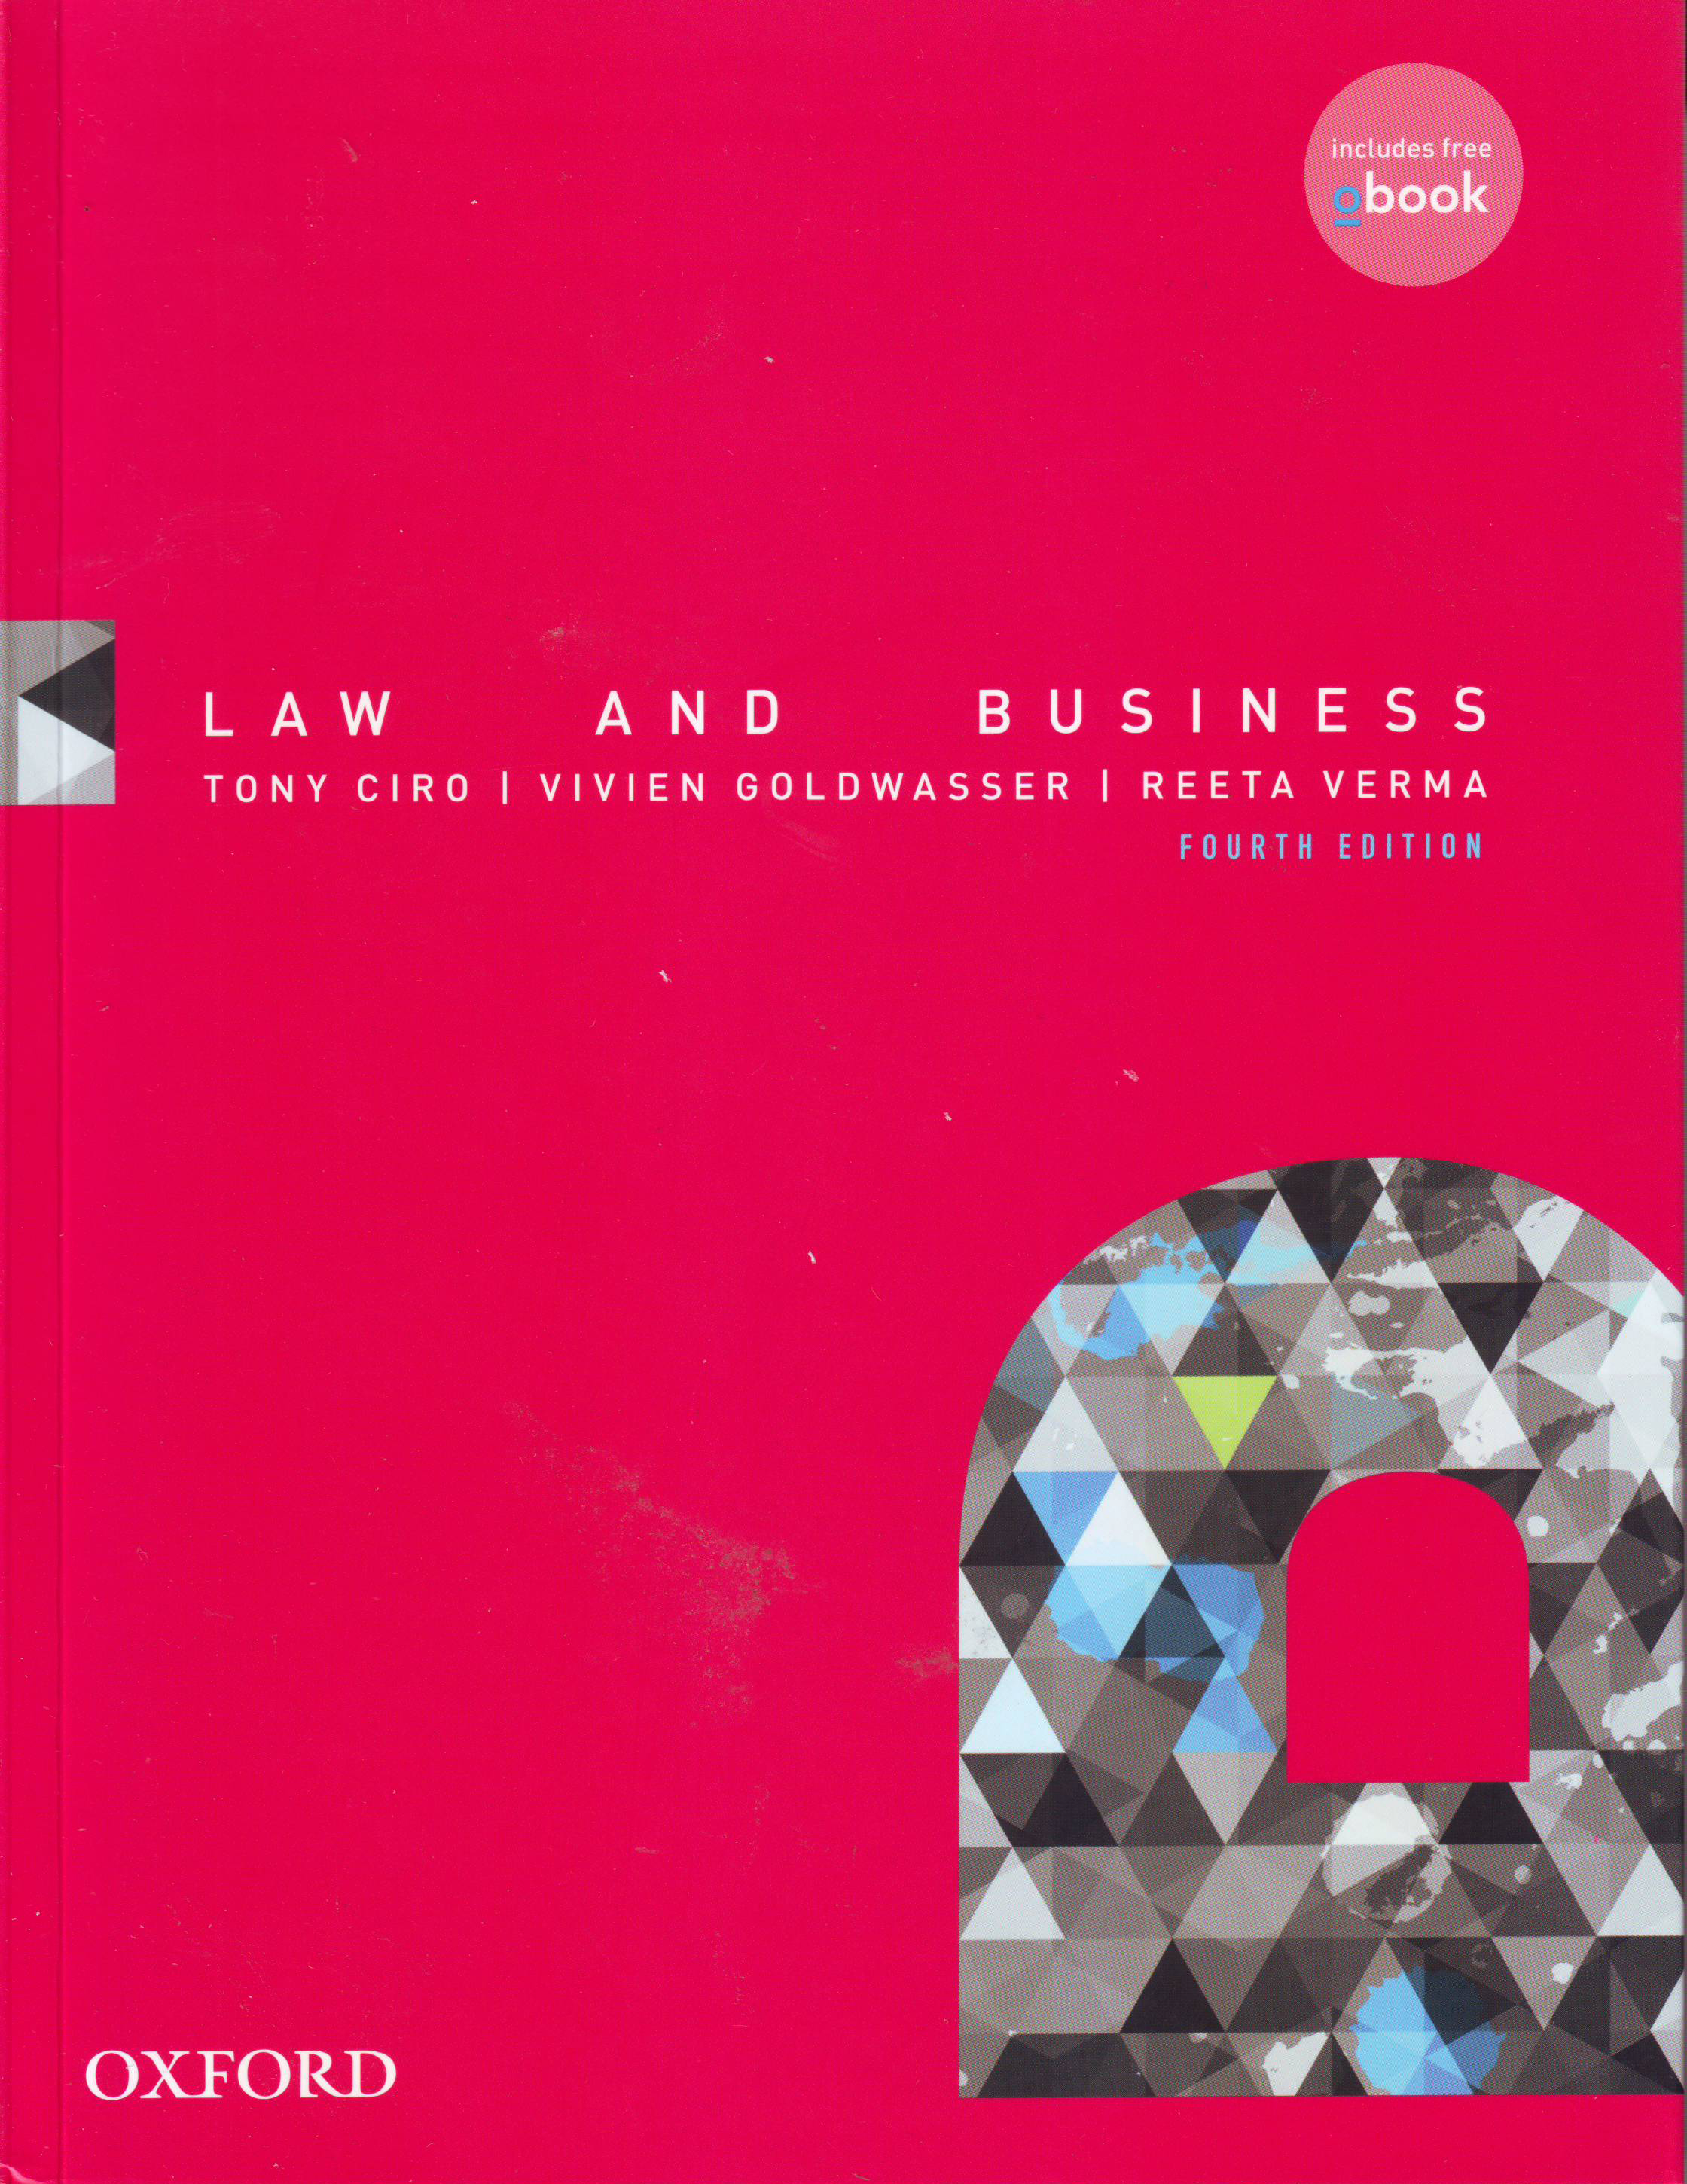 Law and Business e4